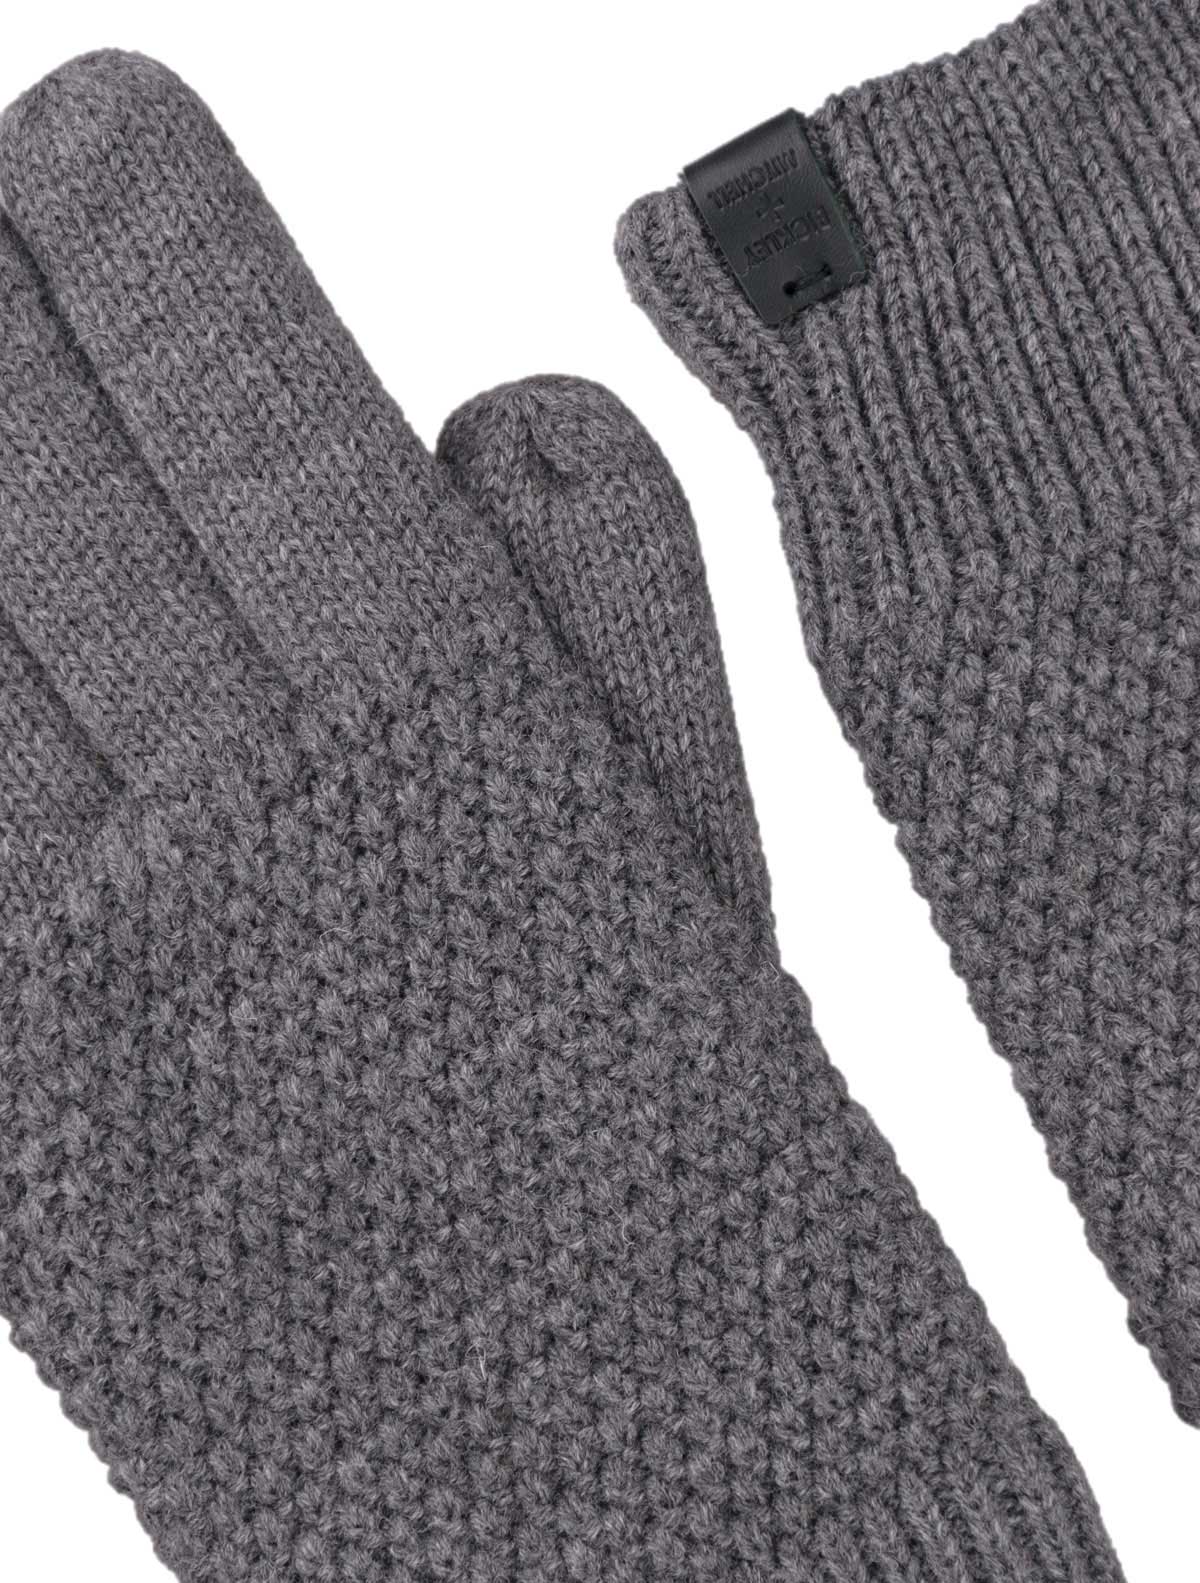 Classic moss-knitted gloves
with fleece lining